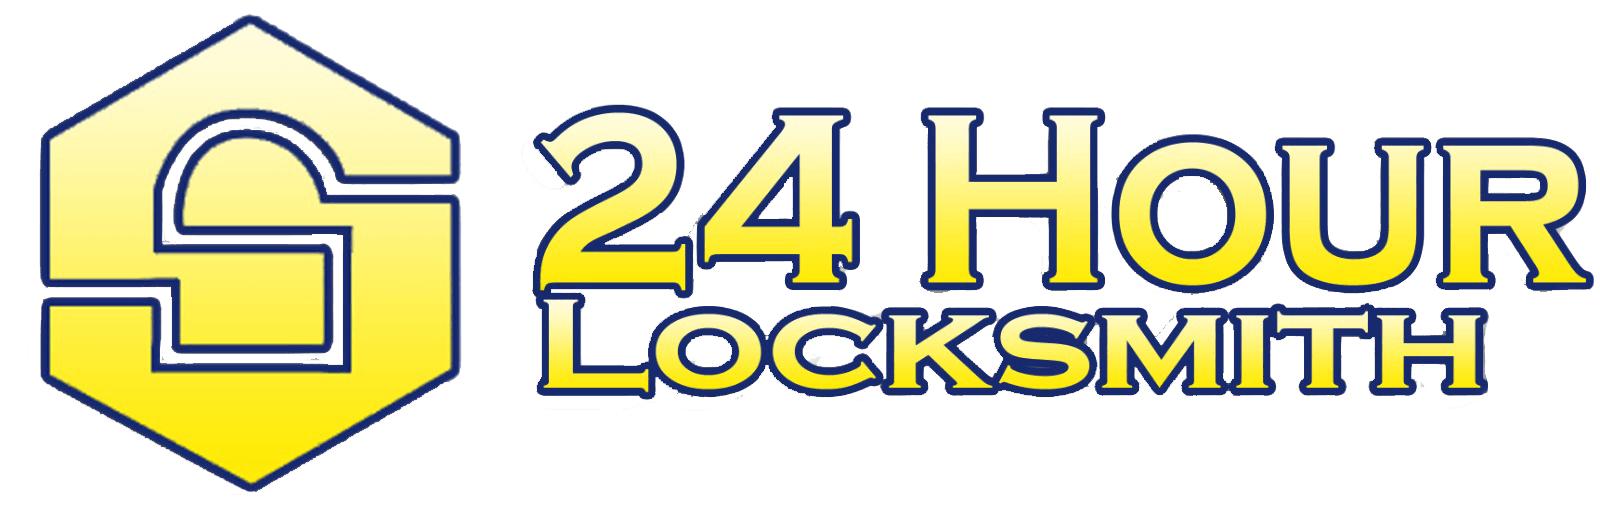 24 Hour Locksmith in Raleigh, NC